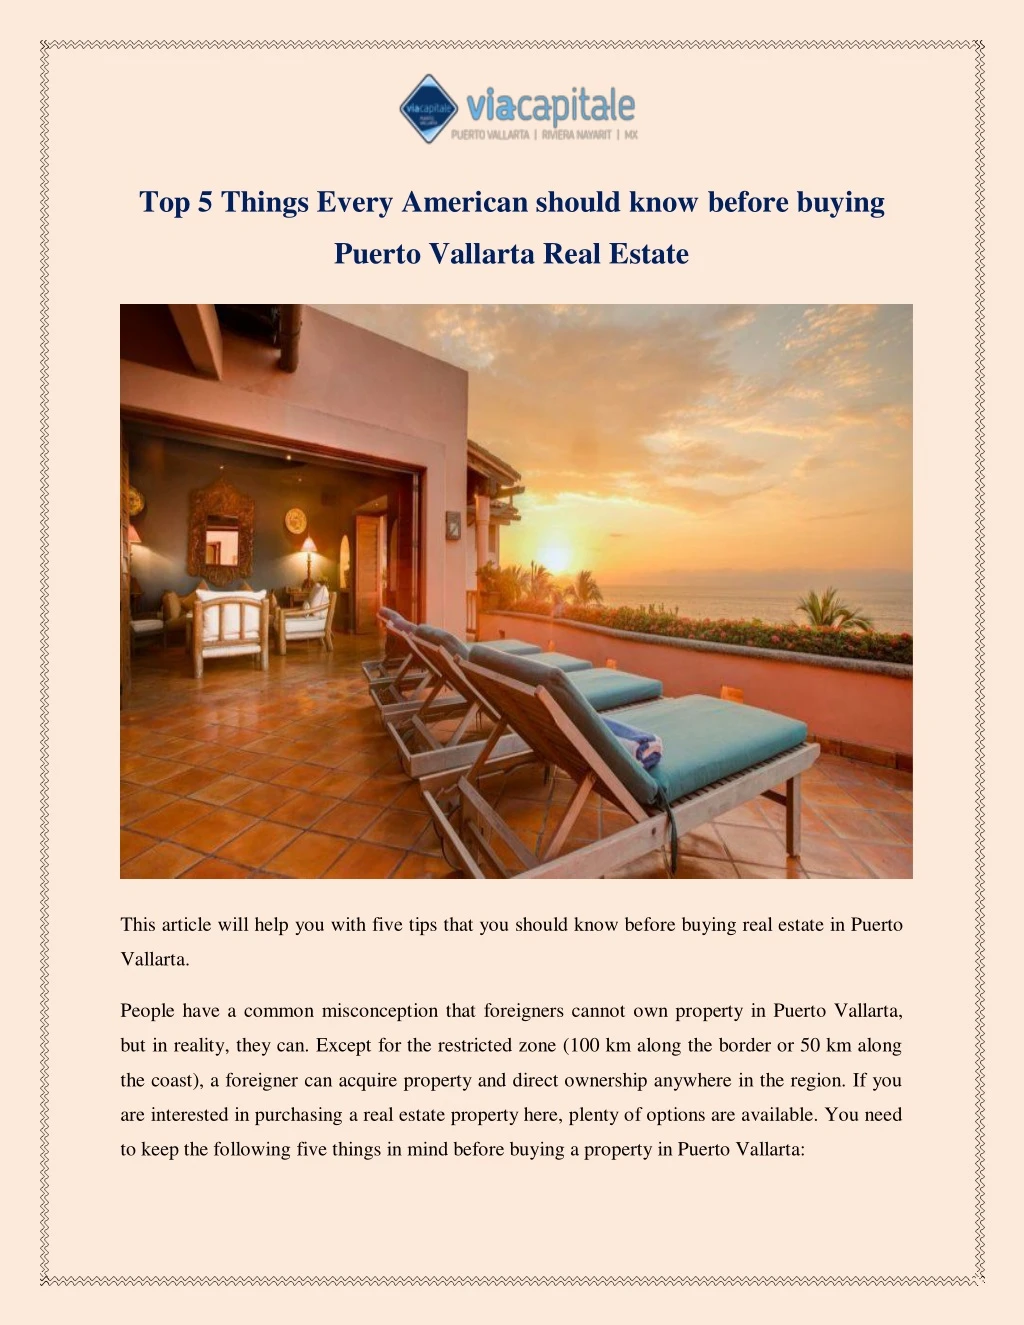 top 5 things every american should know before